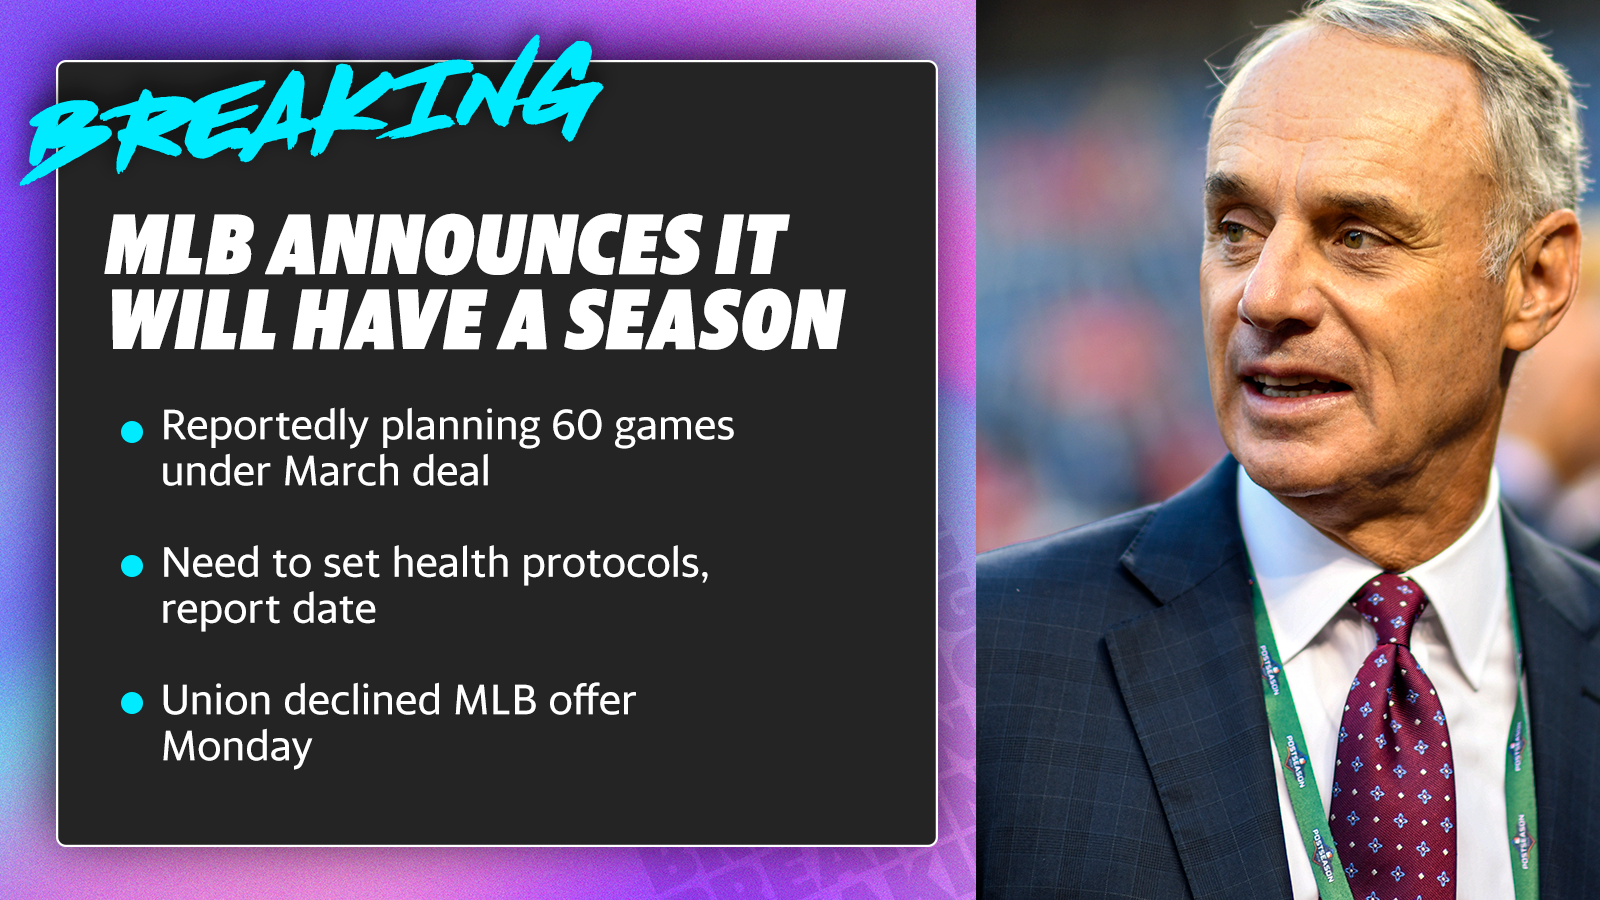 MLB announces new features for 2020 season